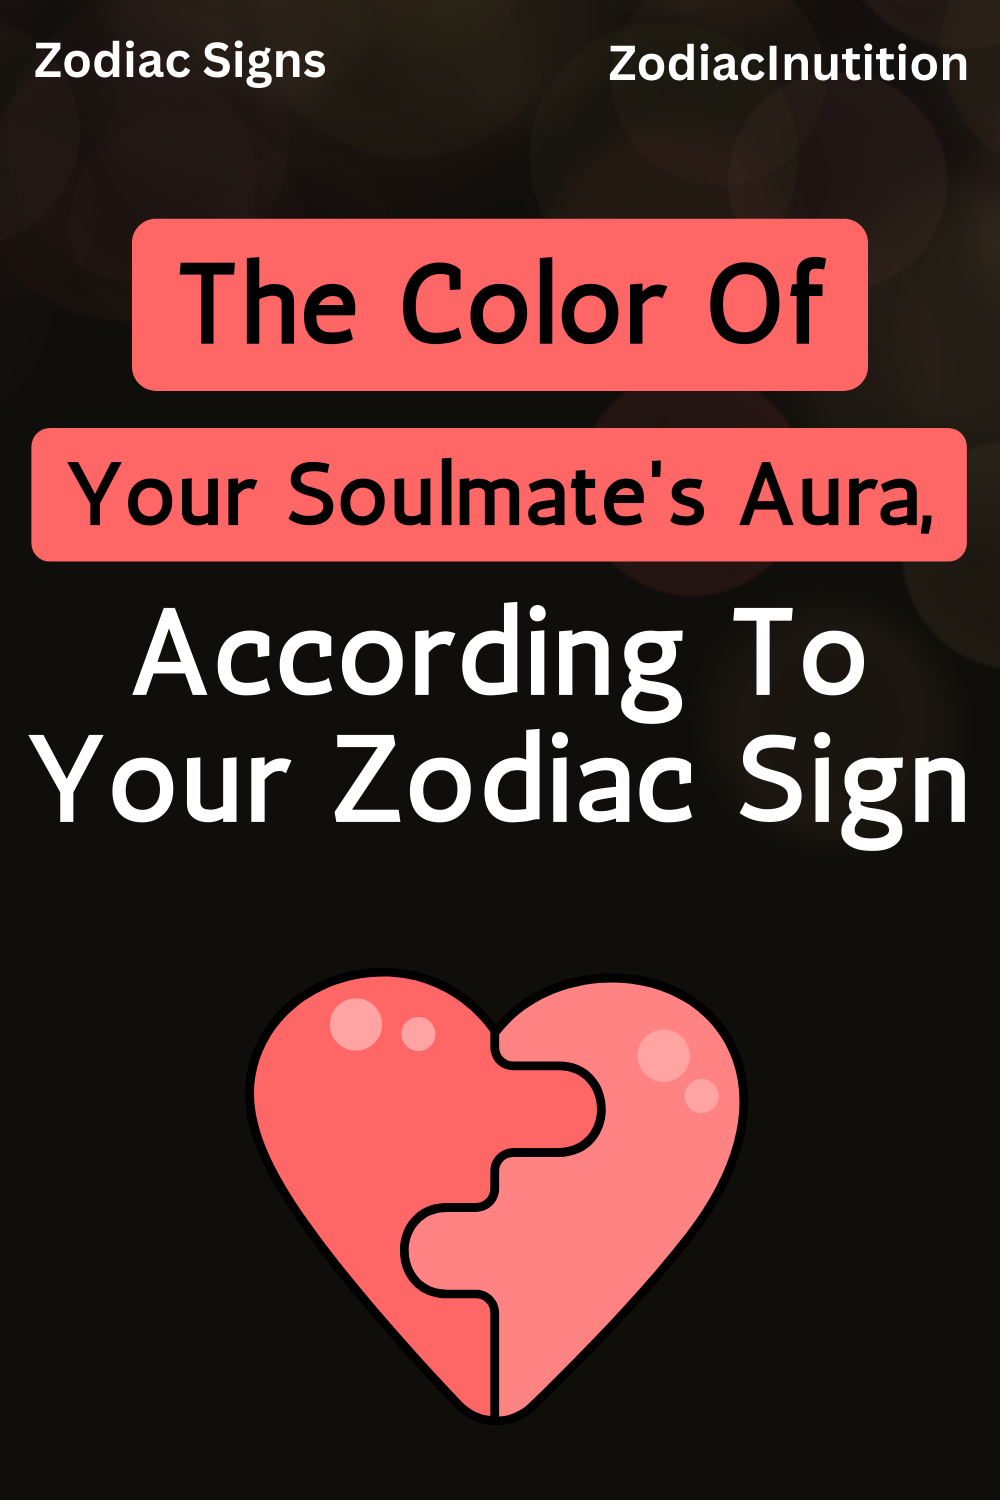 The Color Of Your Soulmate's Aura, According To Your Zodiac Sign